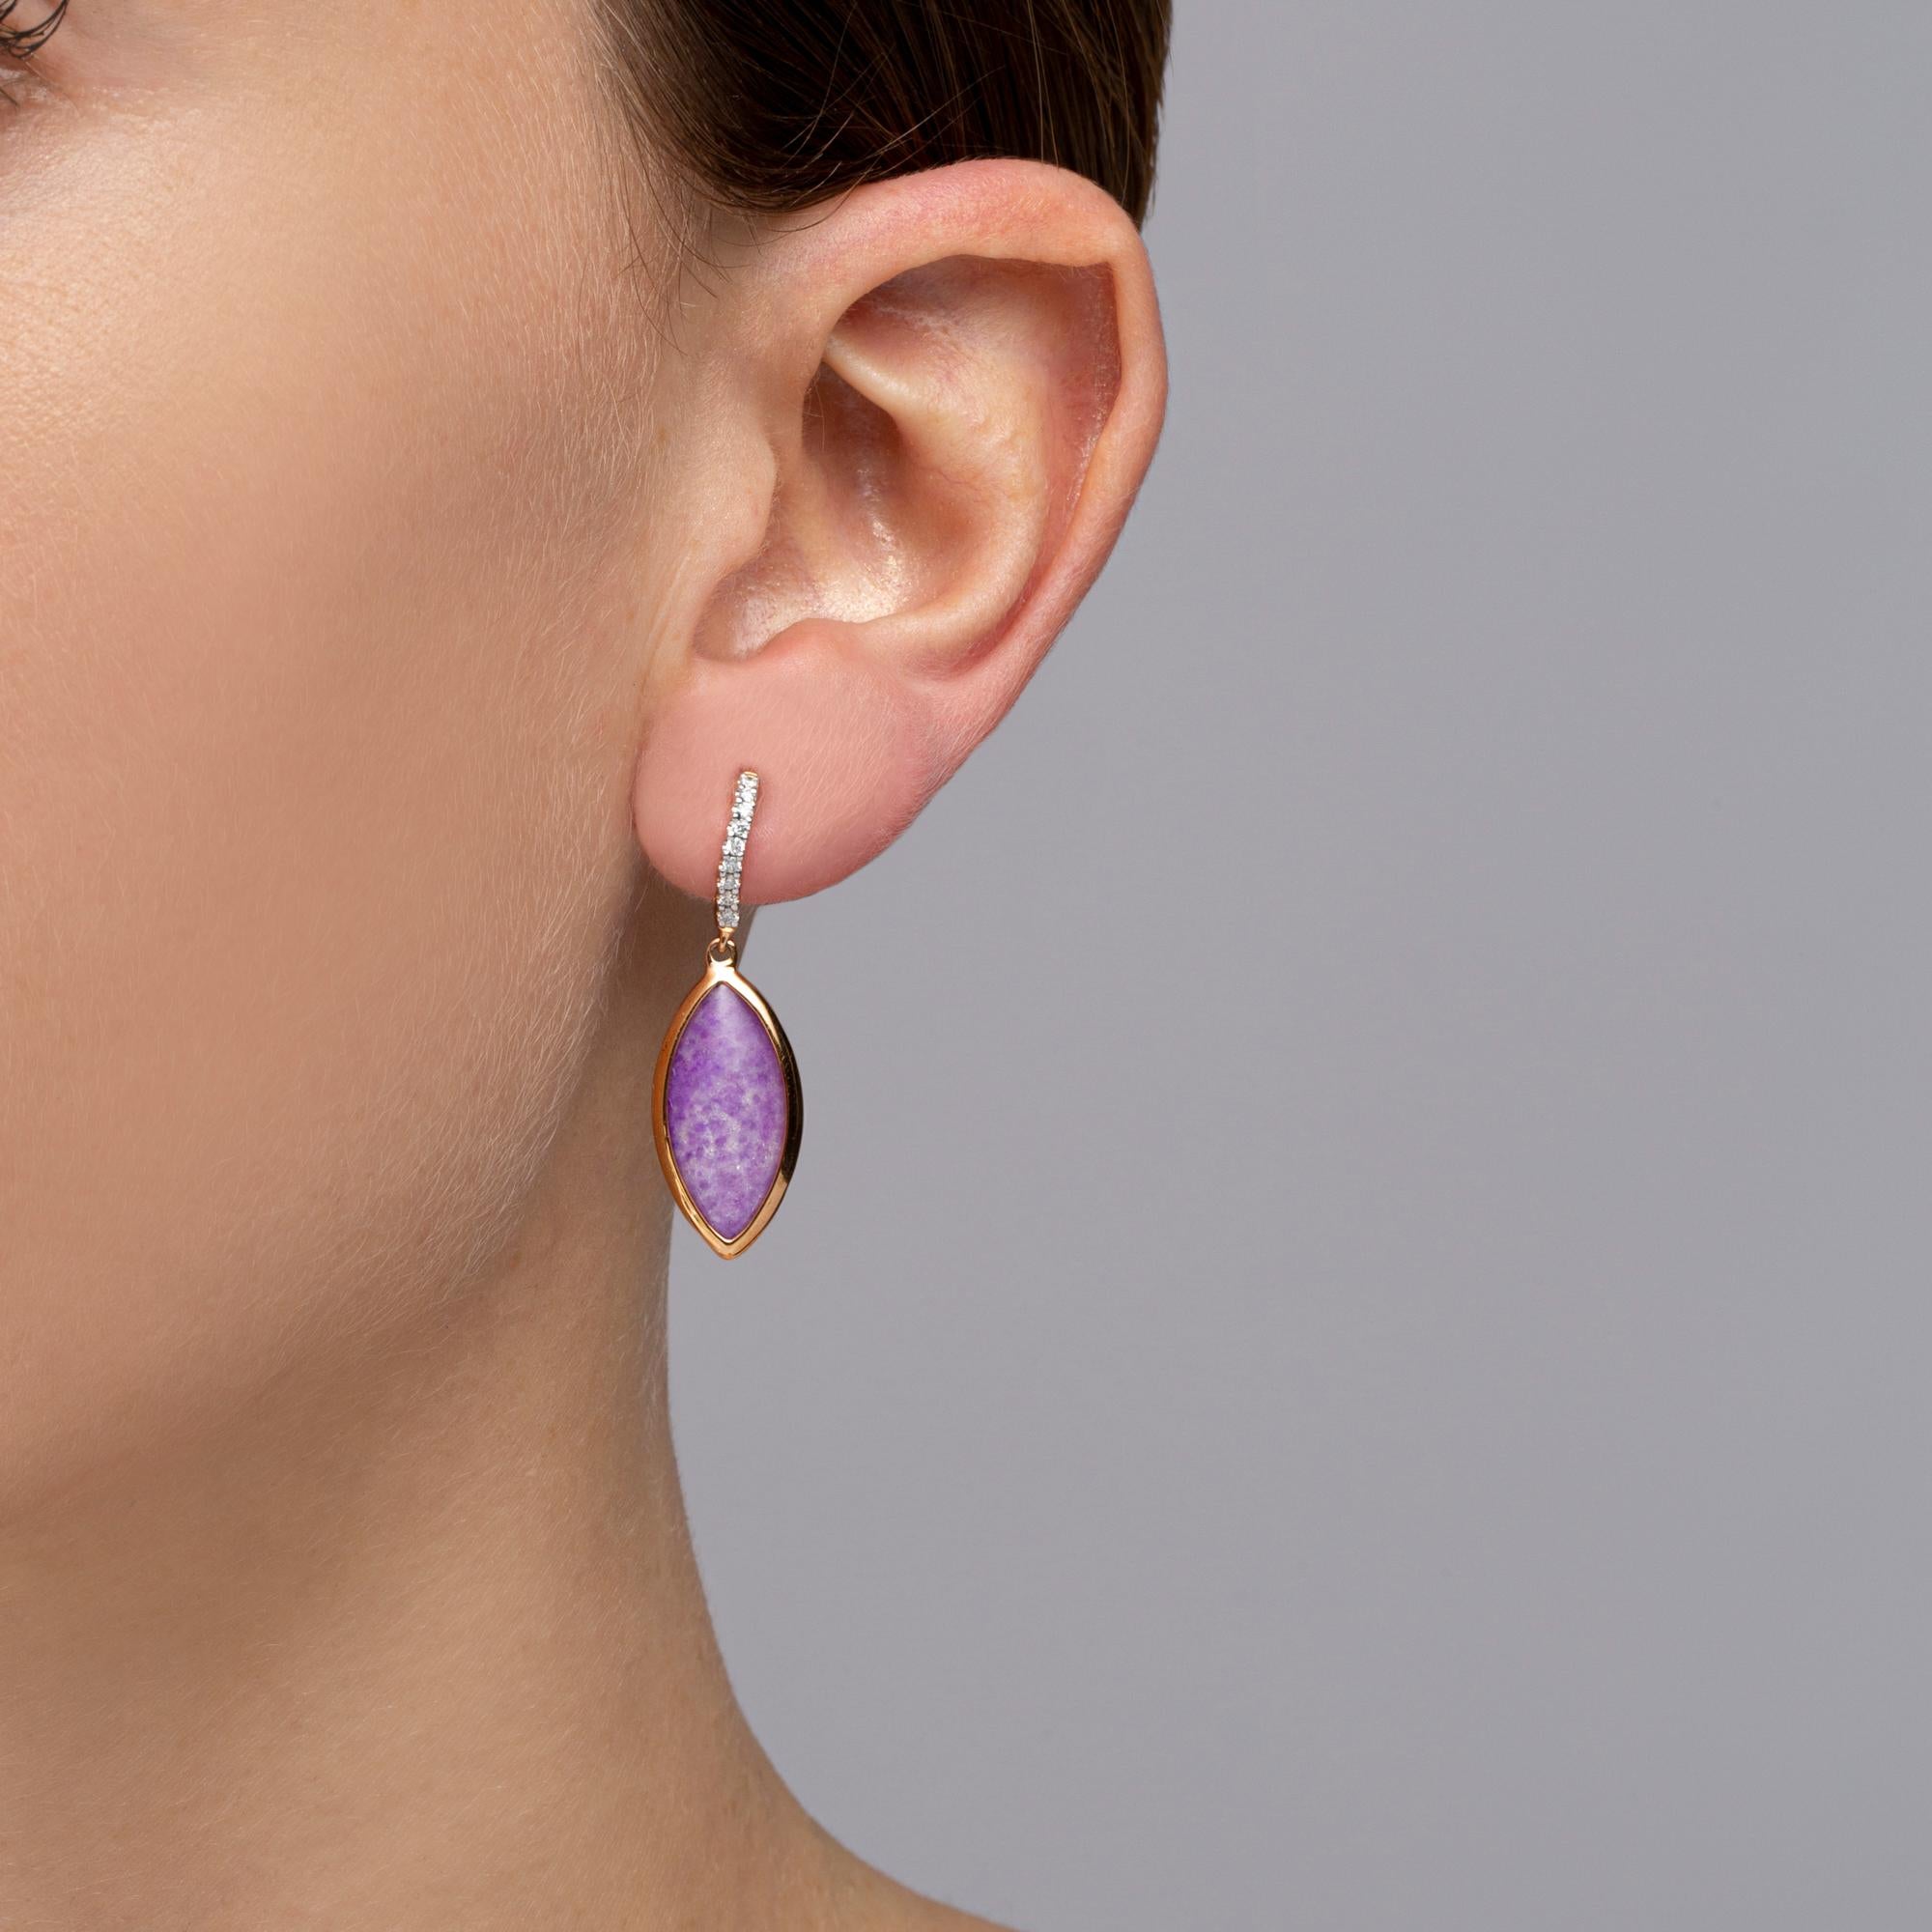 Alex Jona design collection, hand crafted in Italy, 18 Karat rose gold drop earrings set with a cabochon cut Quartz over Sugilite weighing 8.67 carats with 0.17 carats of brown diamonds. Clips can be mounted upon request. Dimensions : H 1.37 in x W